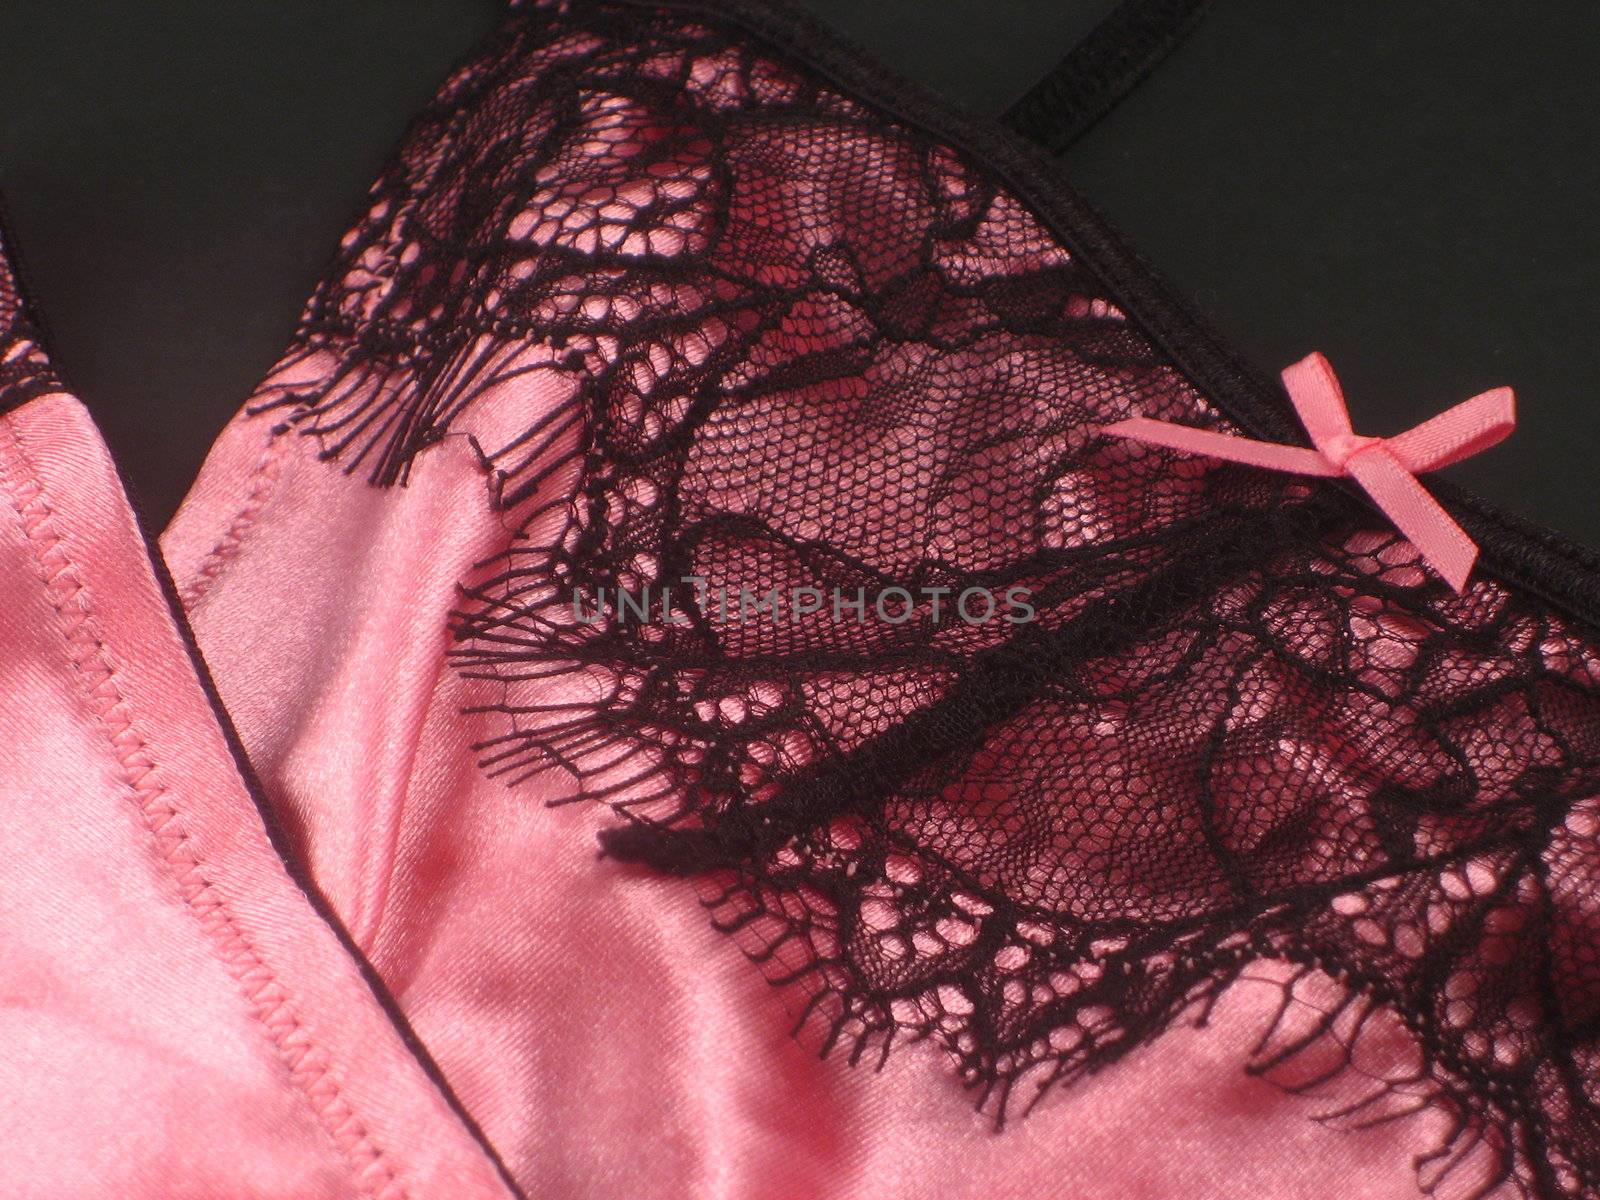 Pictures of sexy and provocative lingerie